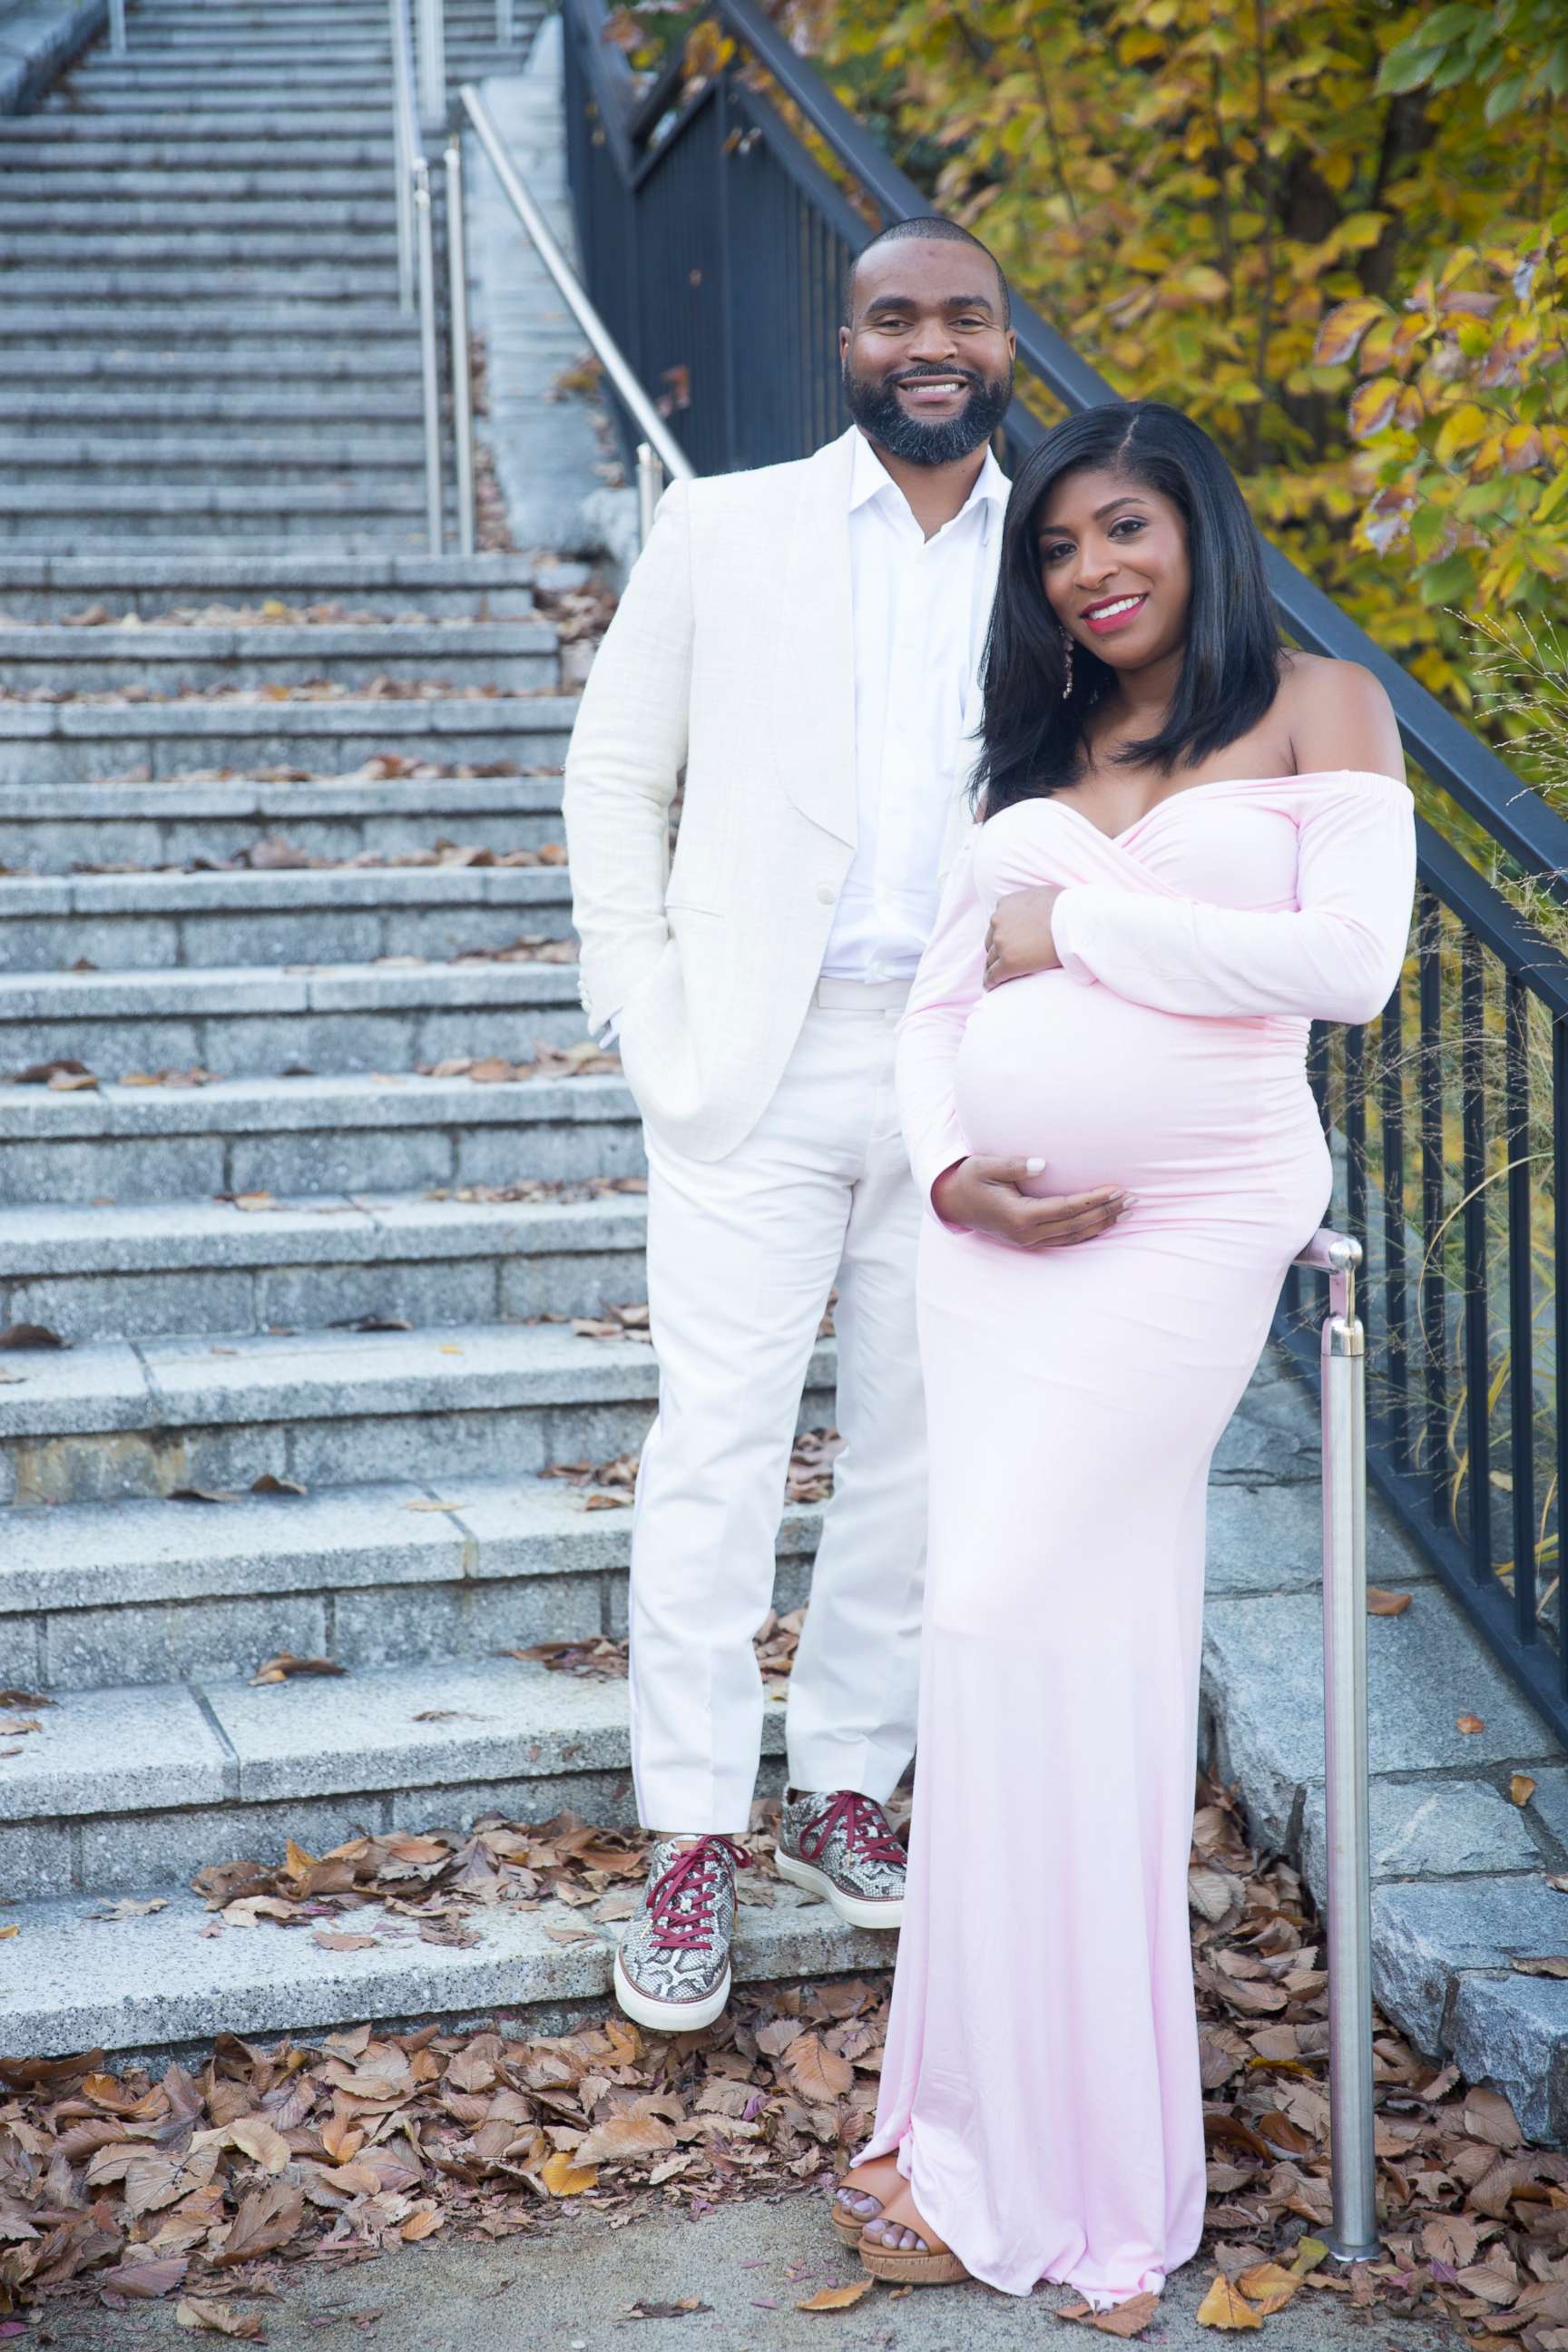 PHOTO: Lisa and Donald Cheatham II pose together during a maternity photo shoot.